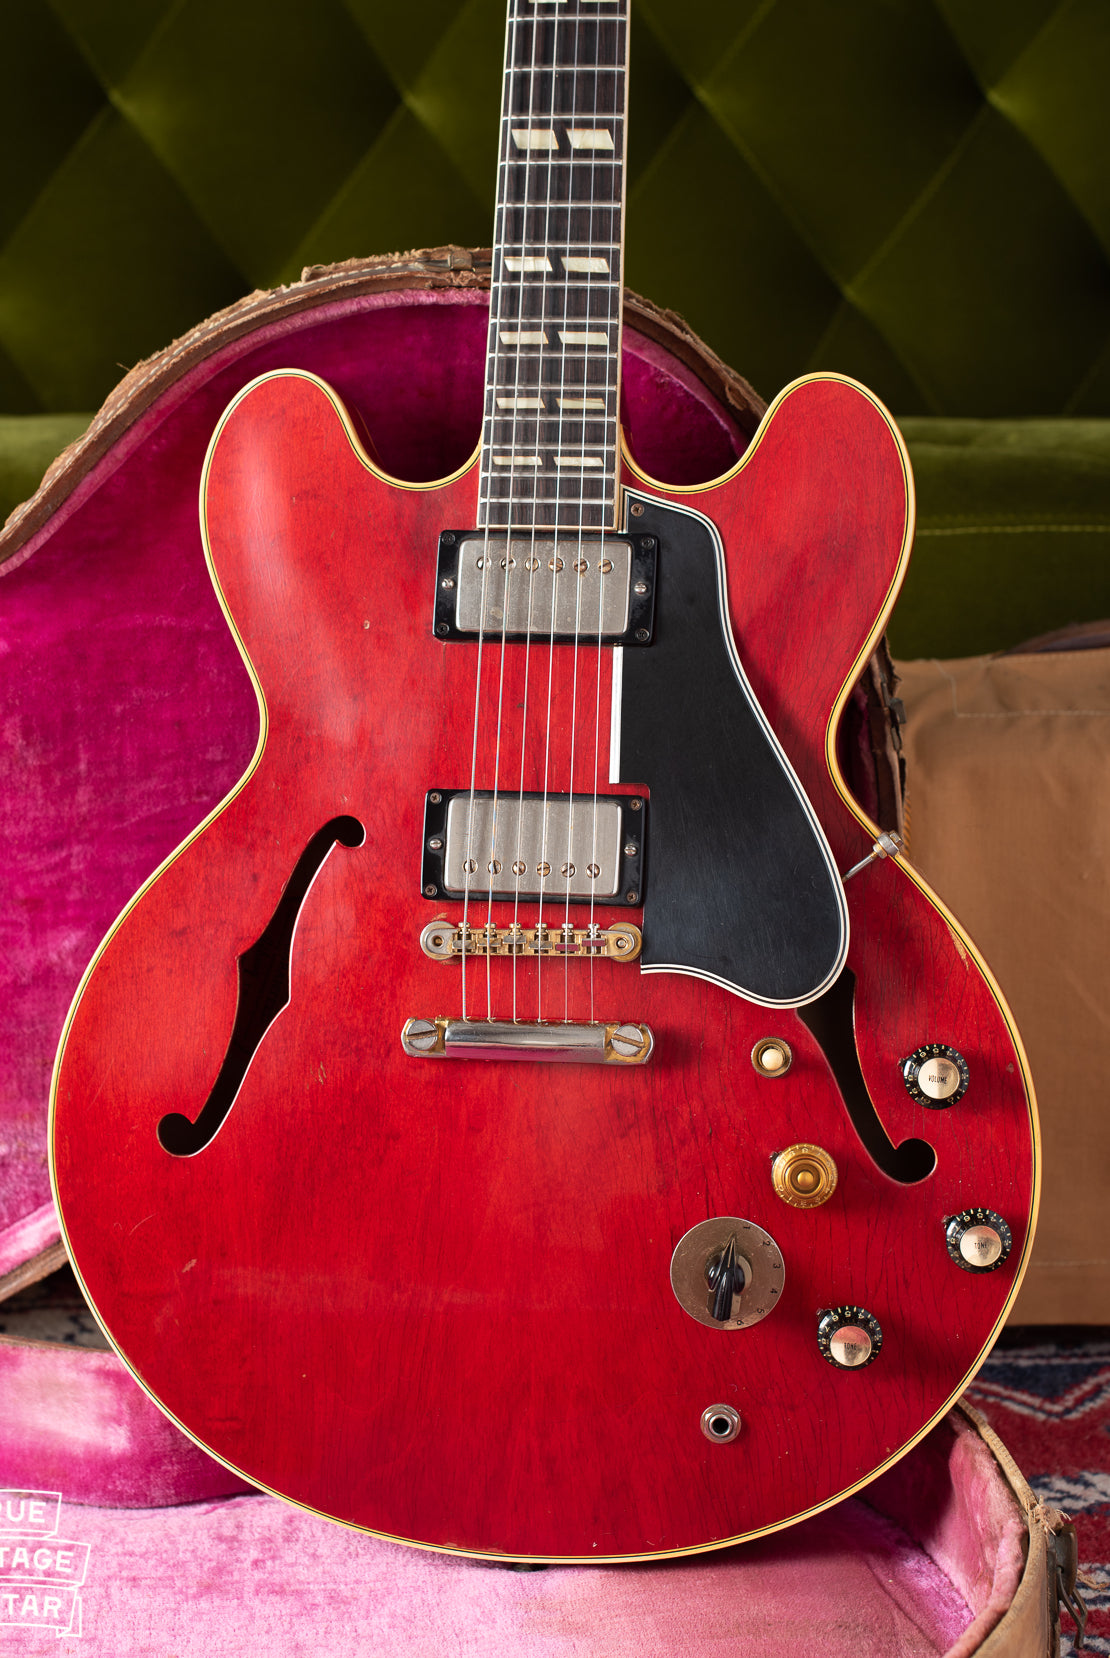 1960 Gibson ES-345 TDC guitar with Cherry Red finish, stop tail, and long pickguard